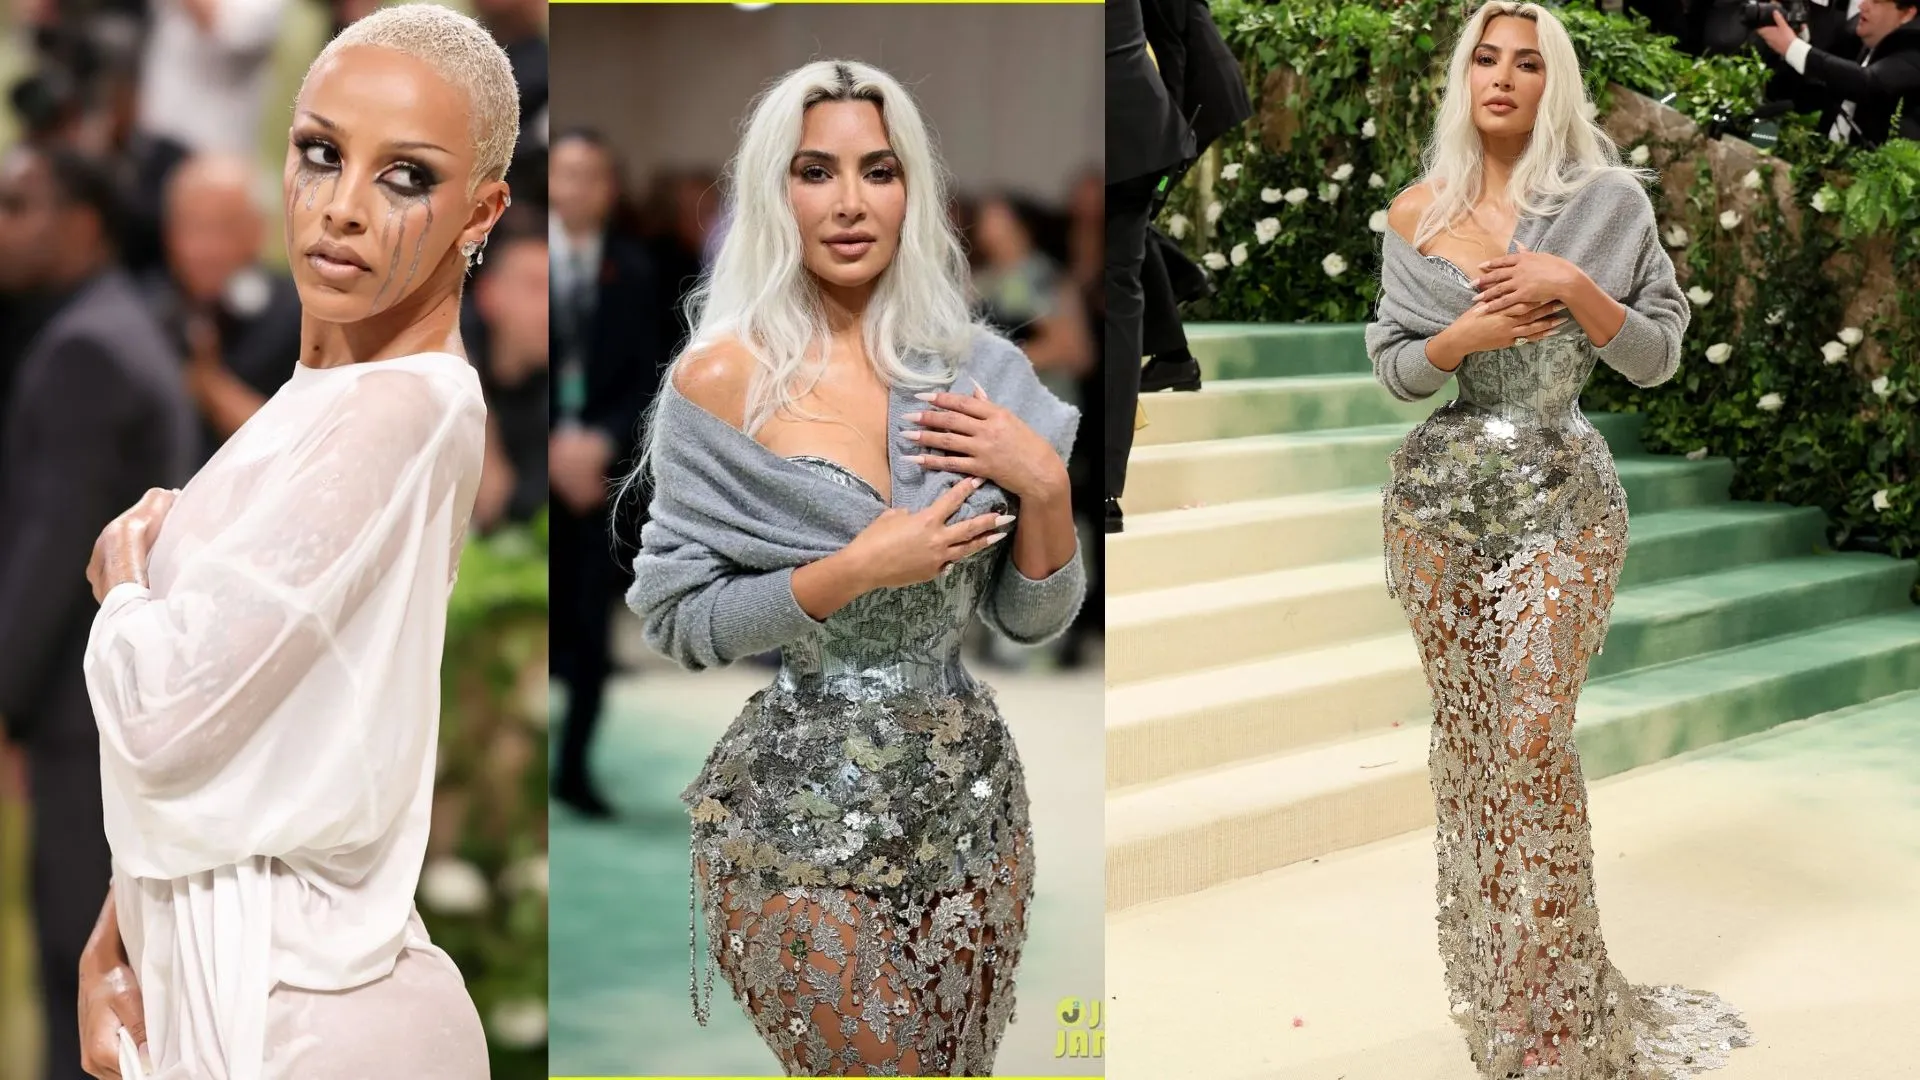 Kim Kardashian ‘Girlfriend's Sweater’ look was something different from the traditional red carpet gown